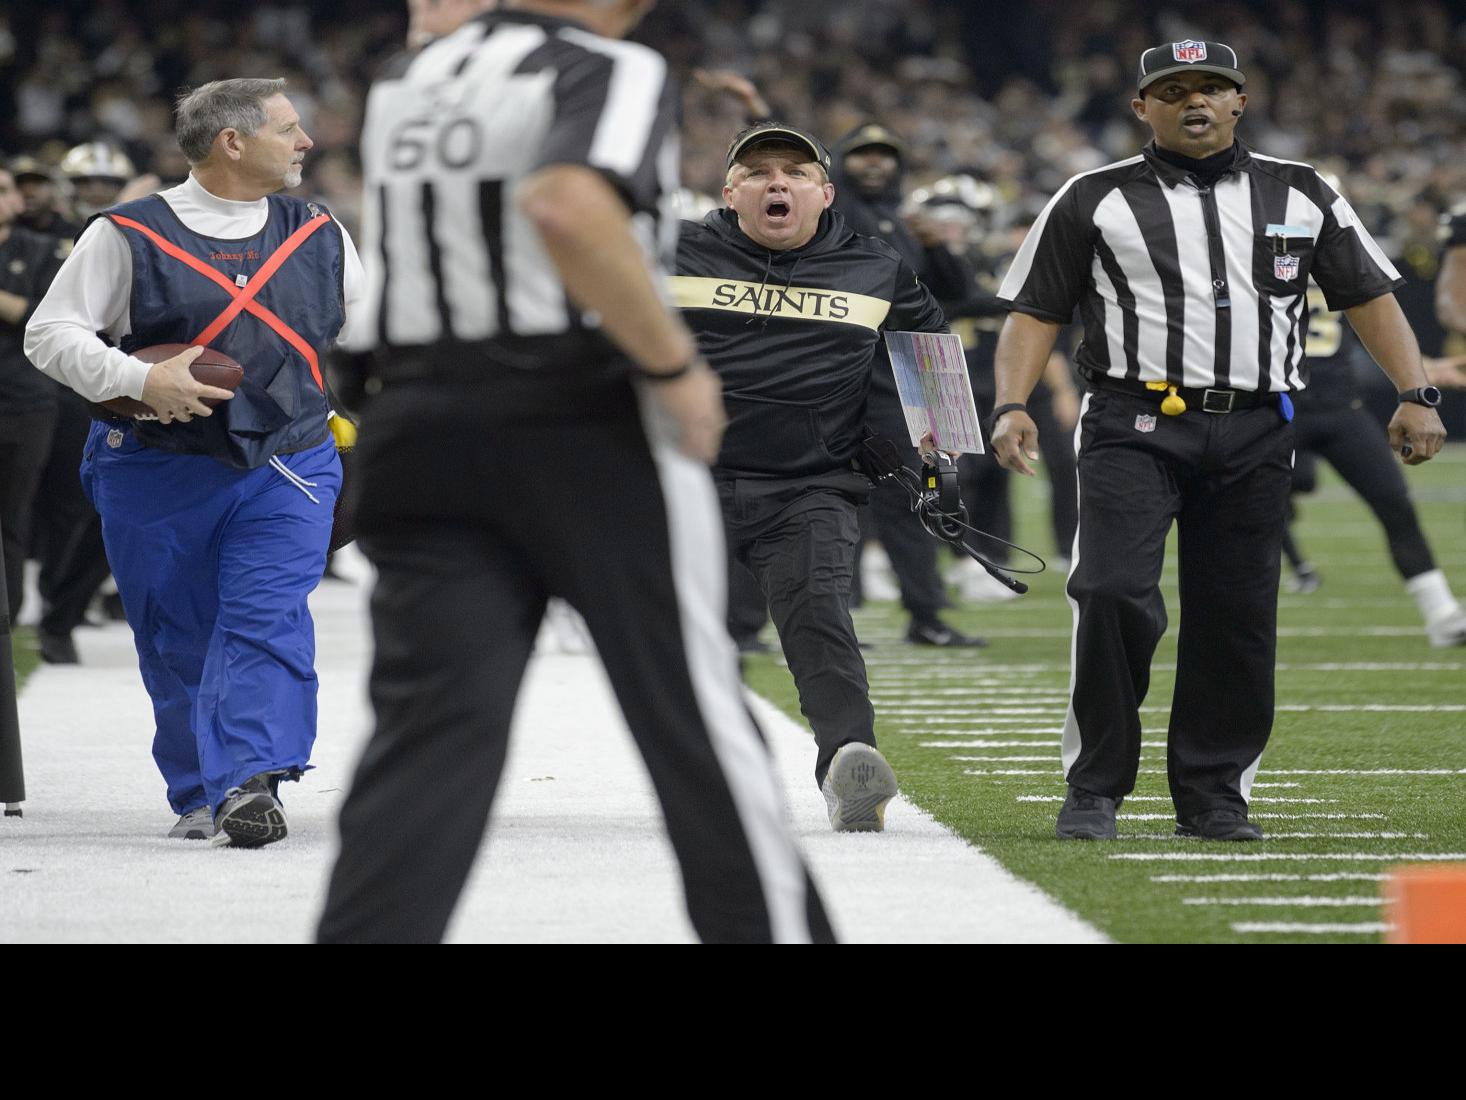 The Saints, Rams and NFL refs turned the NFC Championship game